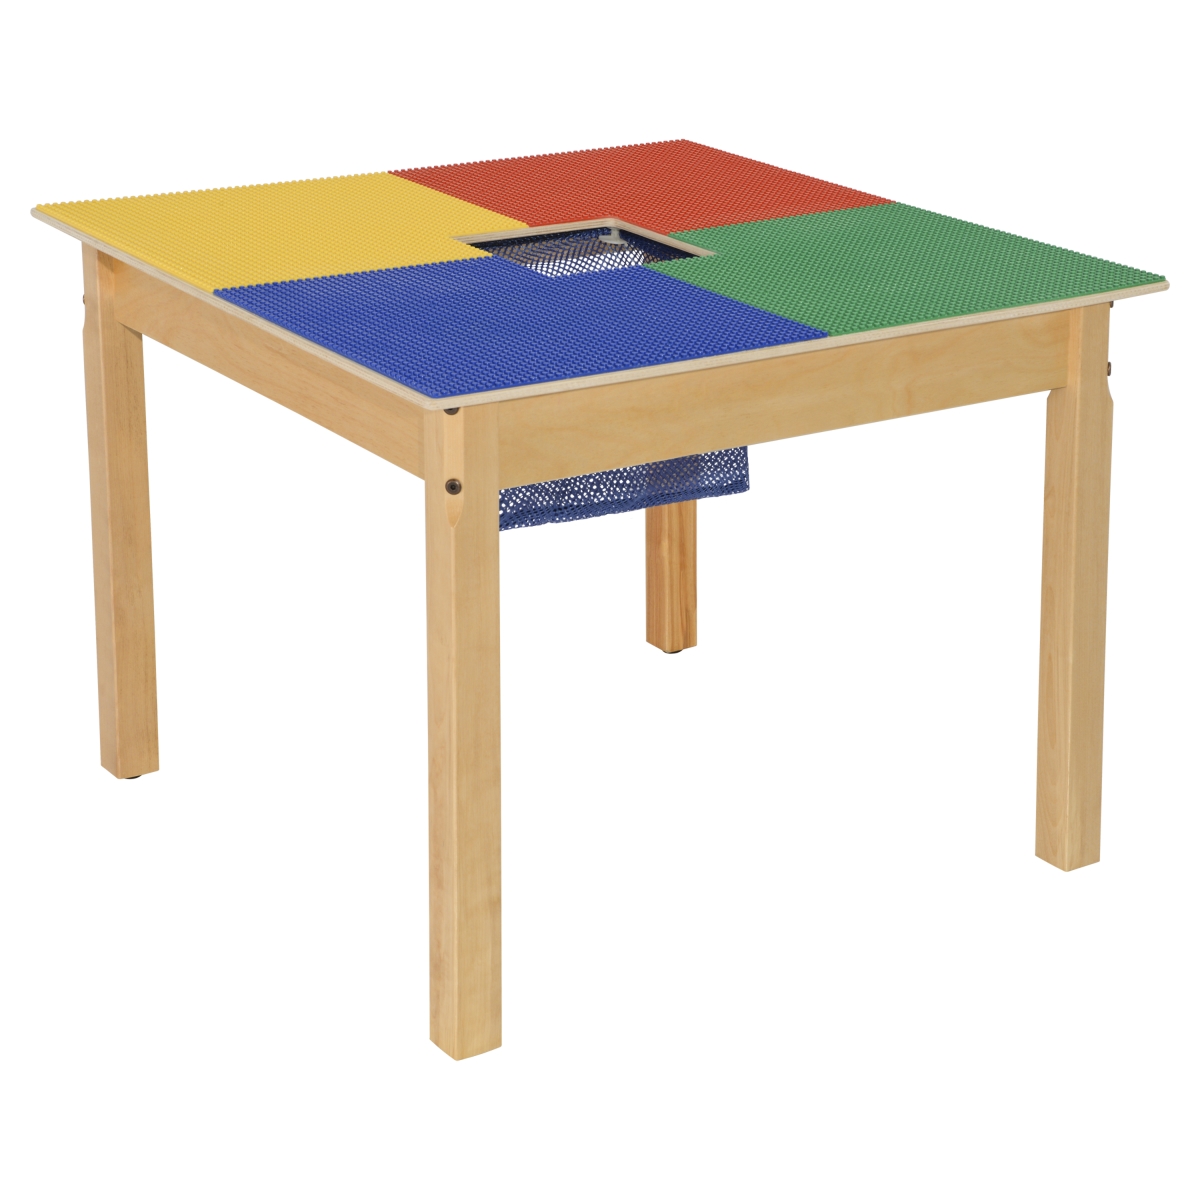 Tp3131sgn22 22 In. Lego Compatible Square Table With Legs, Multi Color